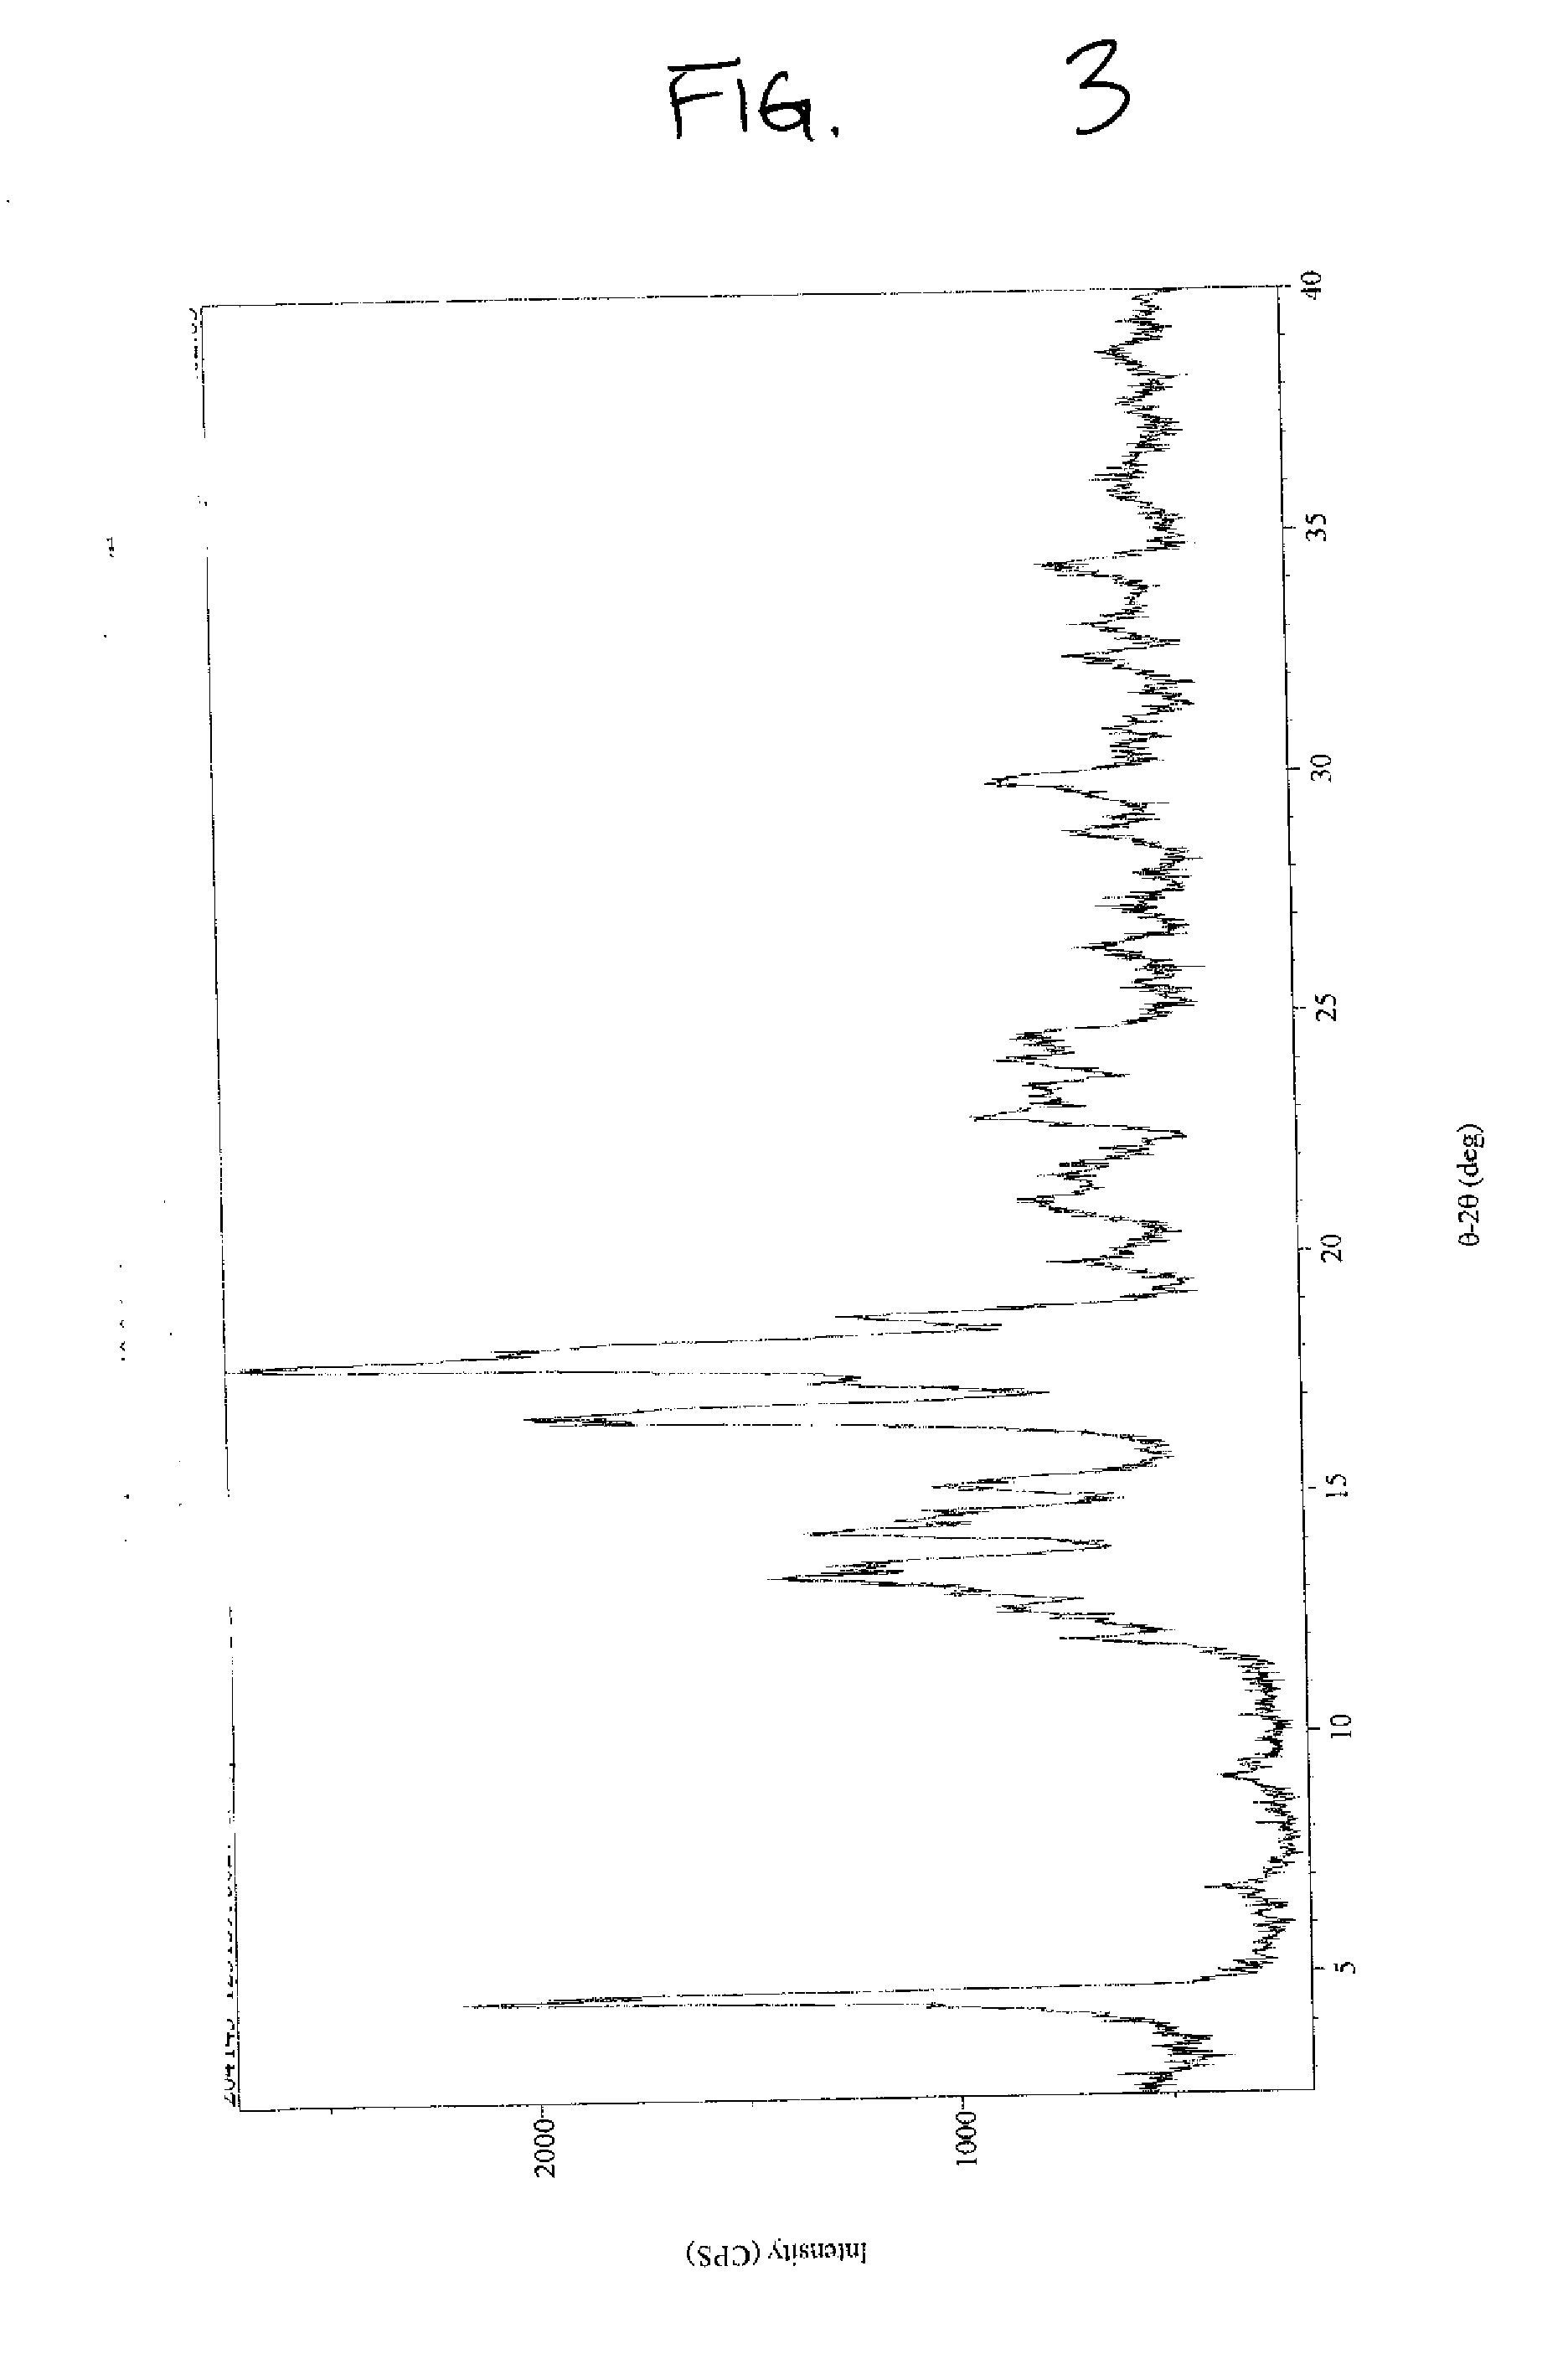 Stevioside Polymorphic and Amorphous Forms, Methods for Their Formulation, and Uses